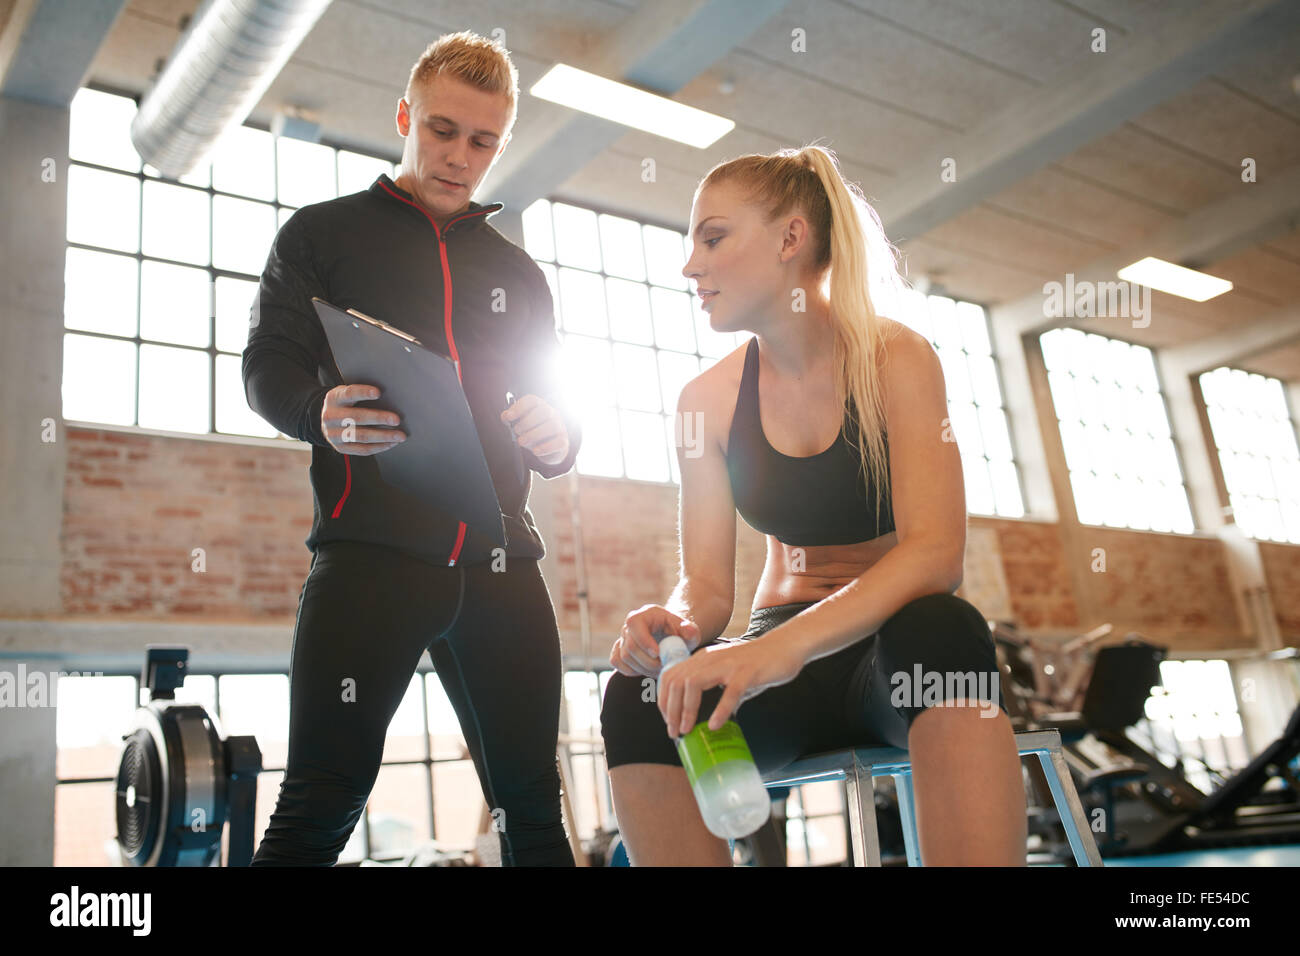 Personal coach standing near young woman and showing something on his clipboard. Caucasian female relaxing and talking with pers Stock Photo